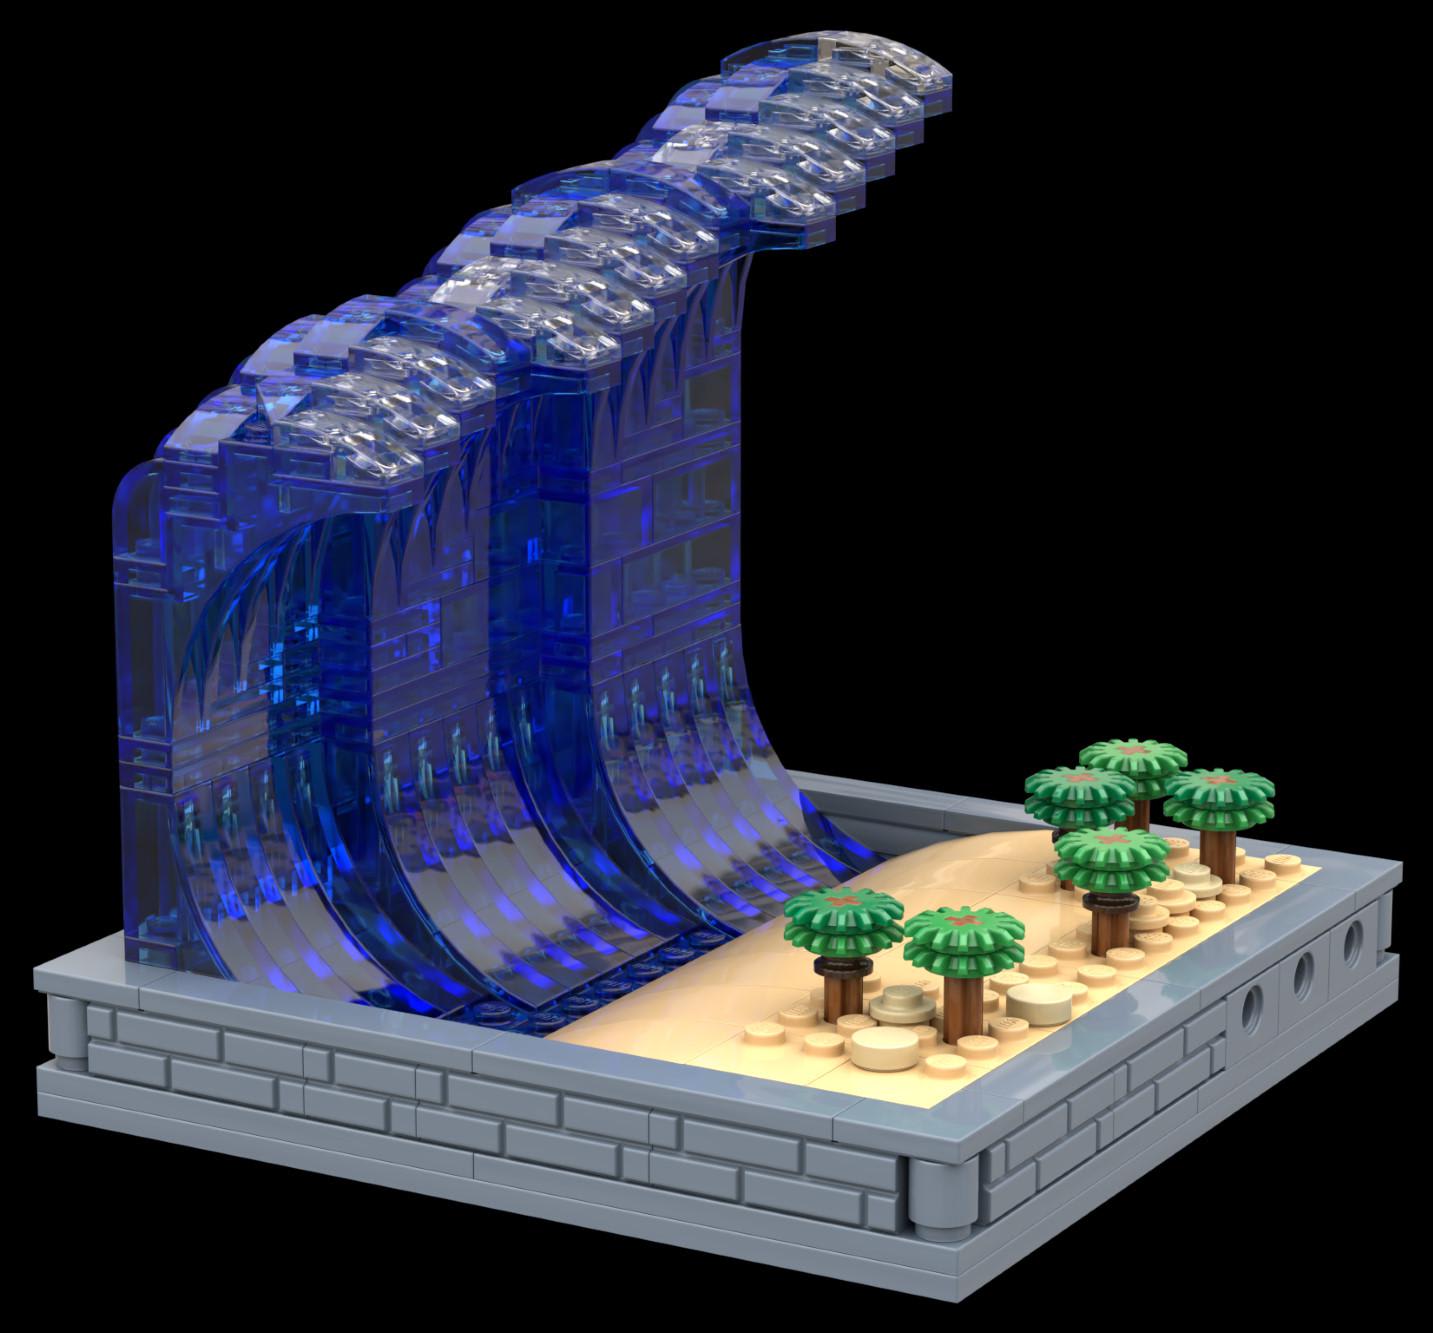 My LEGO IDEAS design FORCES OF NATURE is a reminder that not humans, but Mother Nature rules the earth - featuring a giant tsunami wave and 3 other natural disasters which are even damaging the model itself! The project needs 10K supporters for a chance of becoming a real LEGO set.